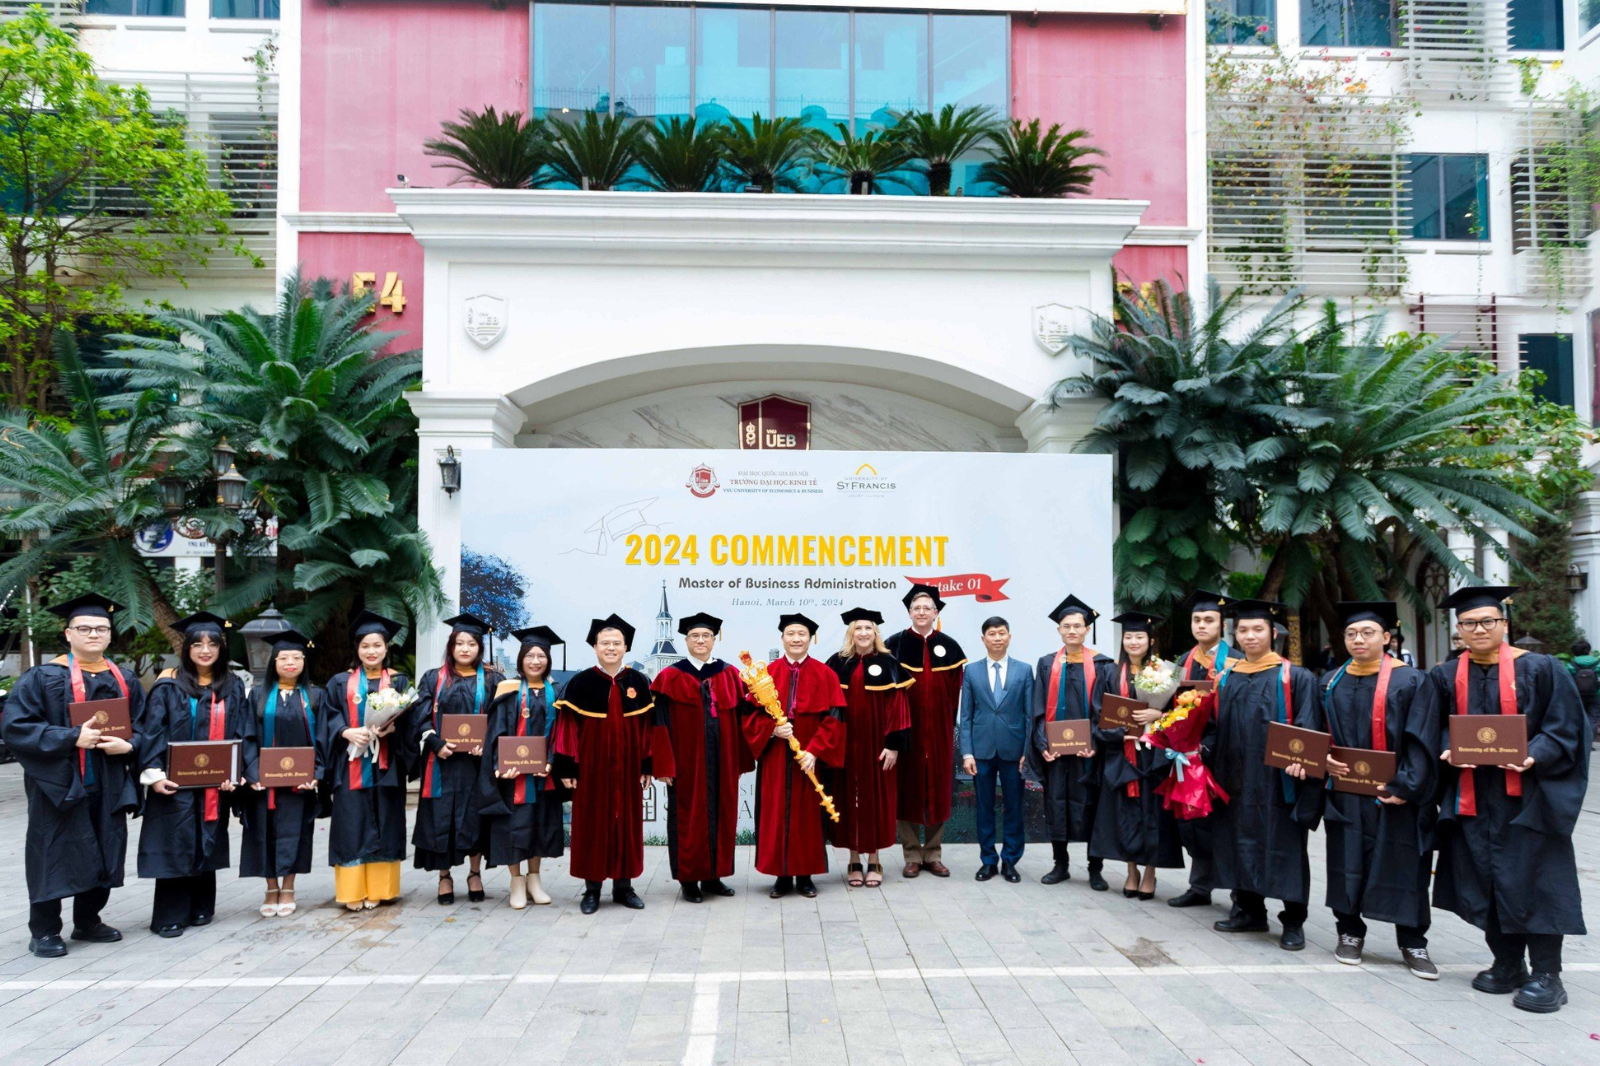 The first graduation ceremony of the Joint training program - Master of Business Administration between UEB and the University of St. Francis